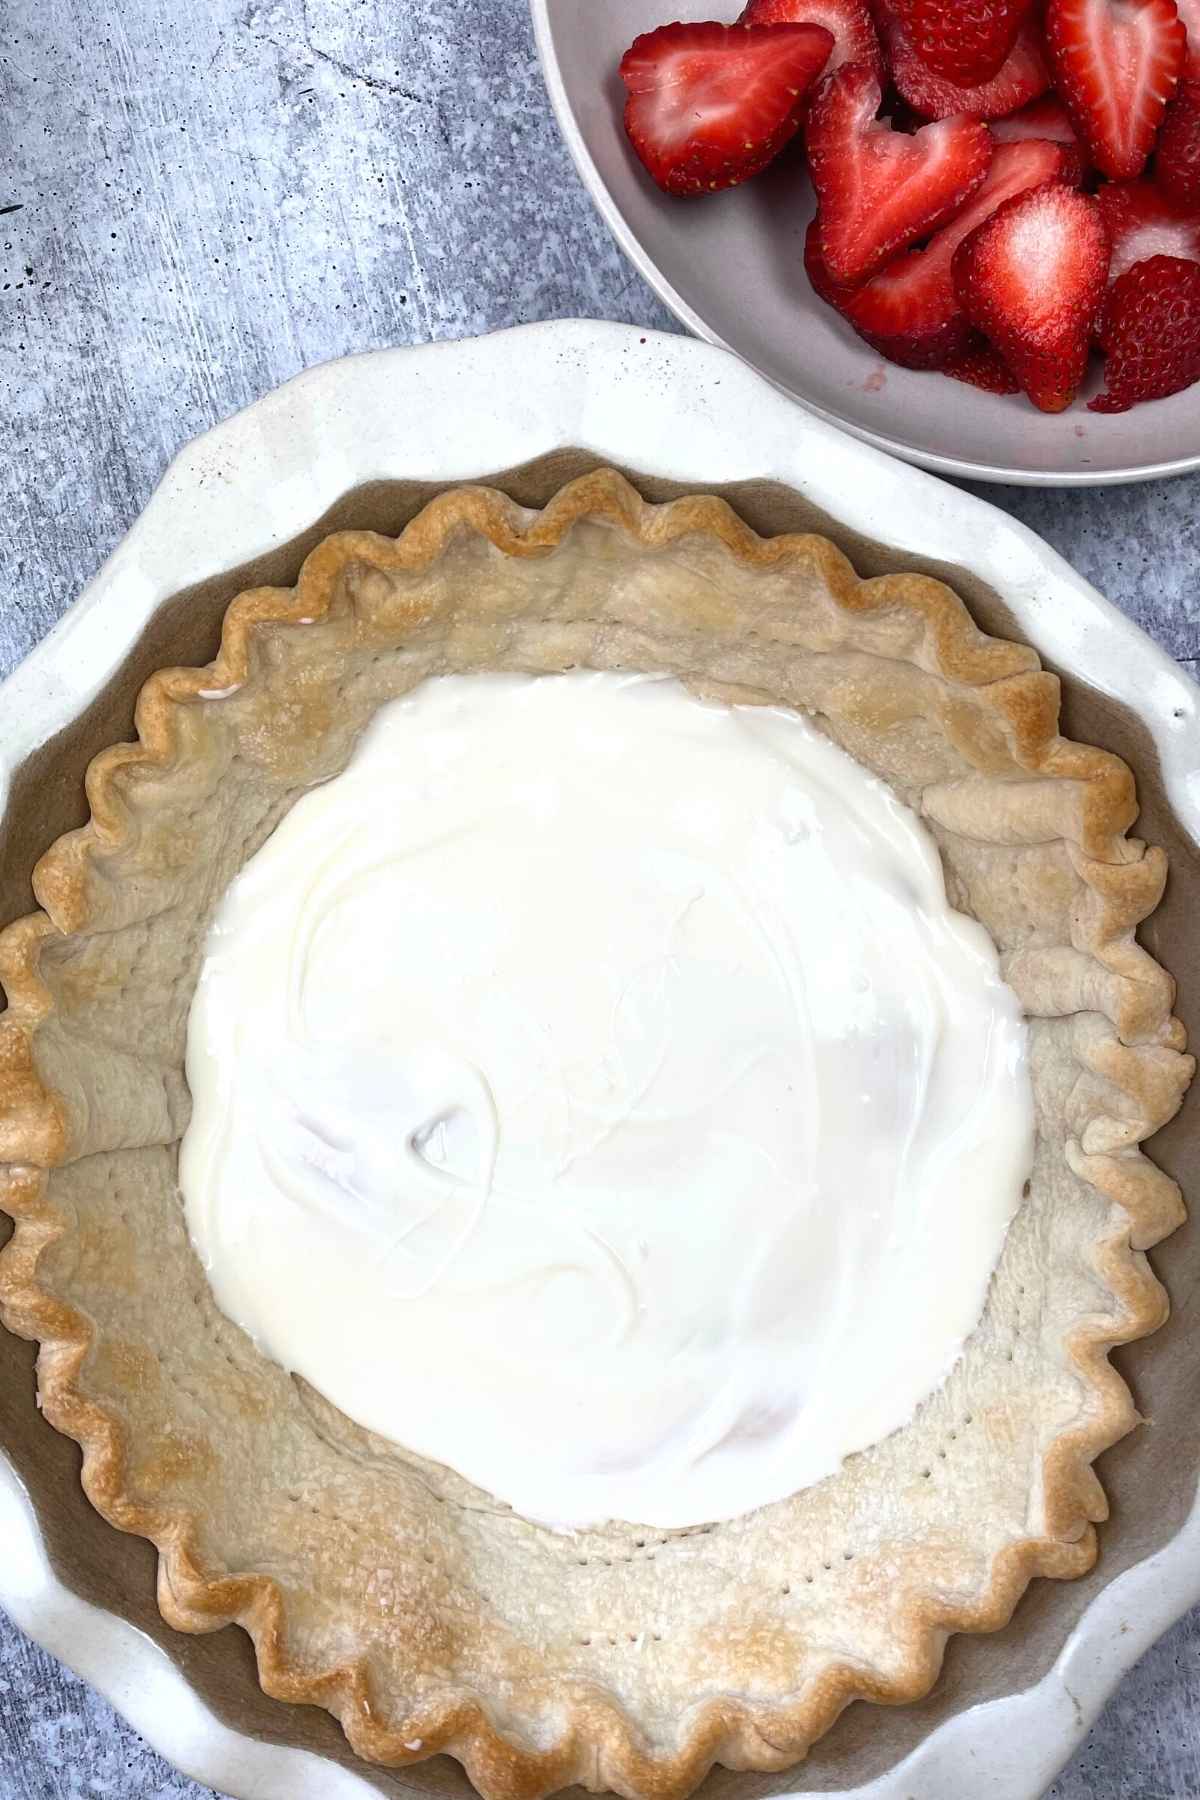 White chocolate spread in the bottom of the baked pie crust.